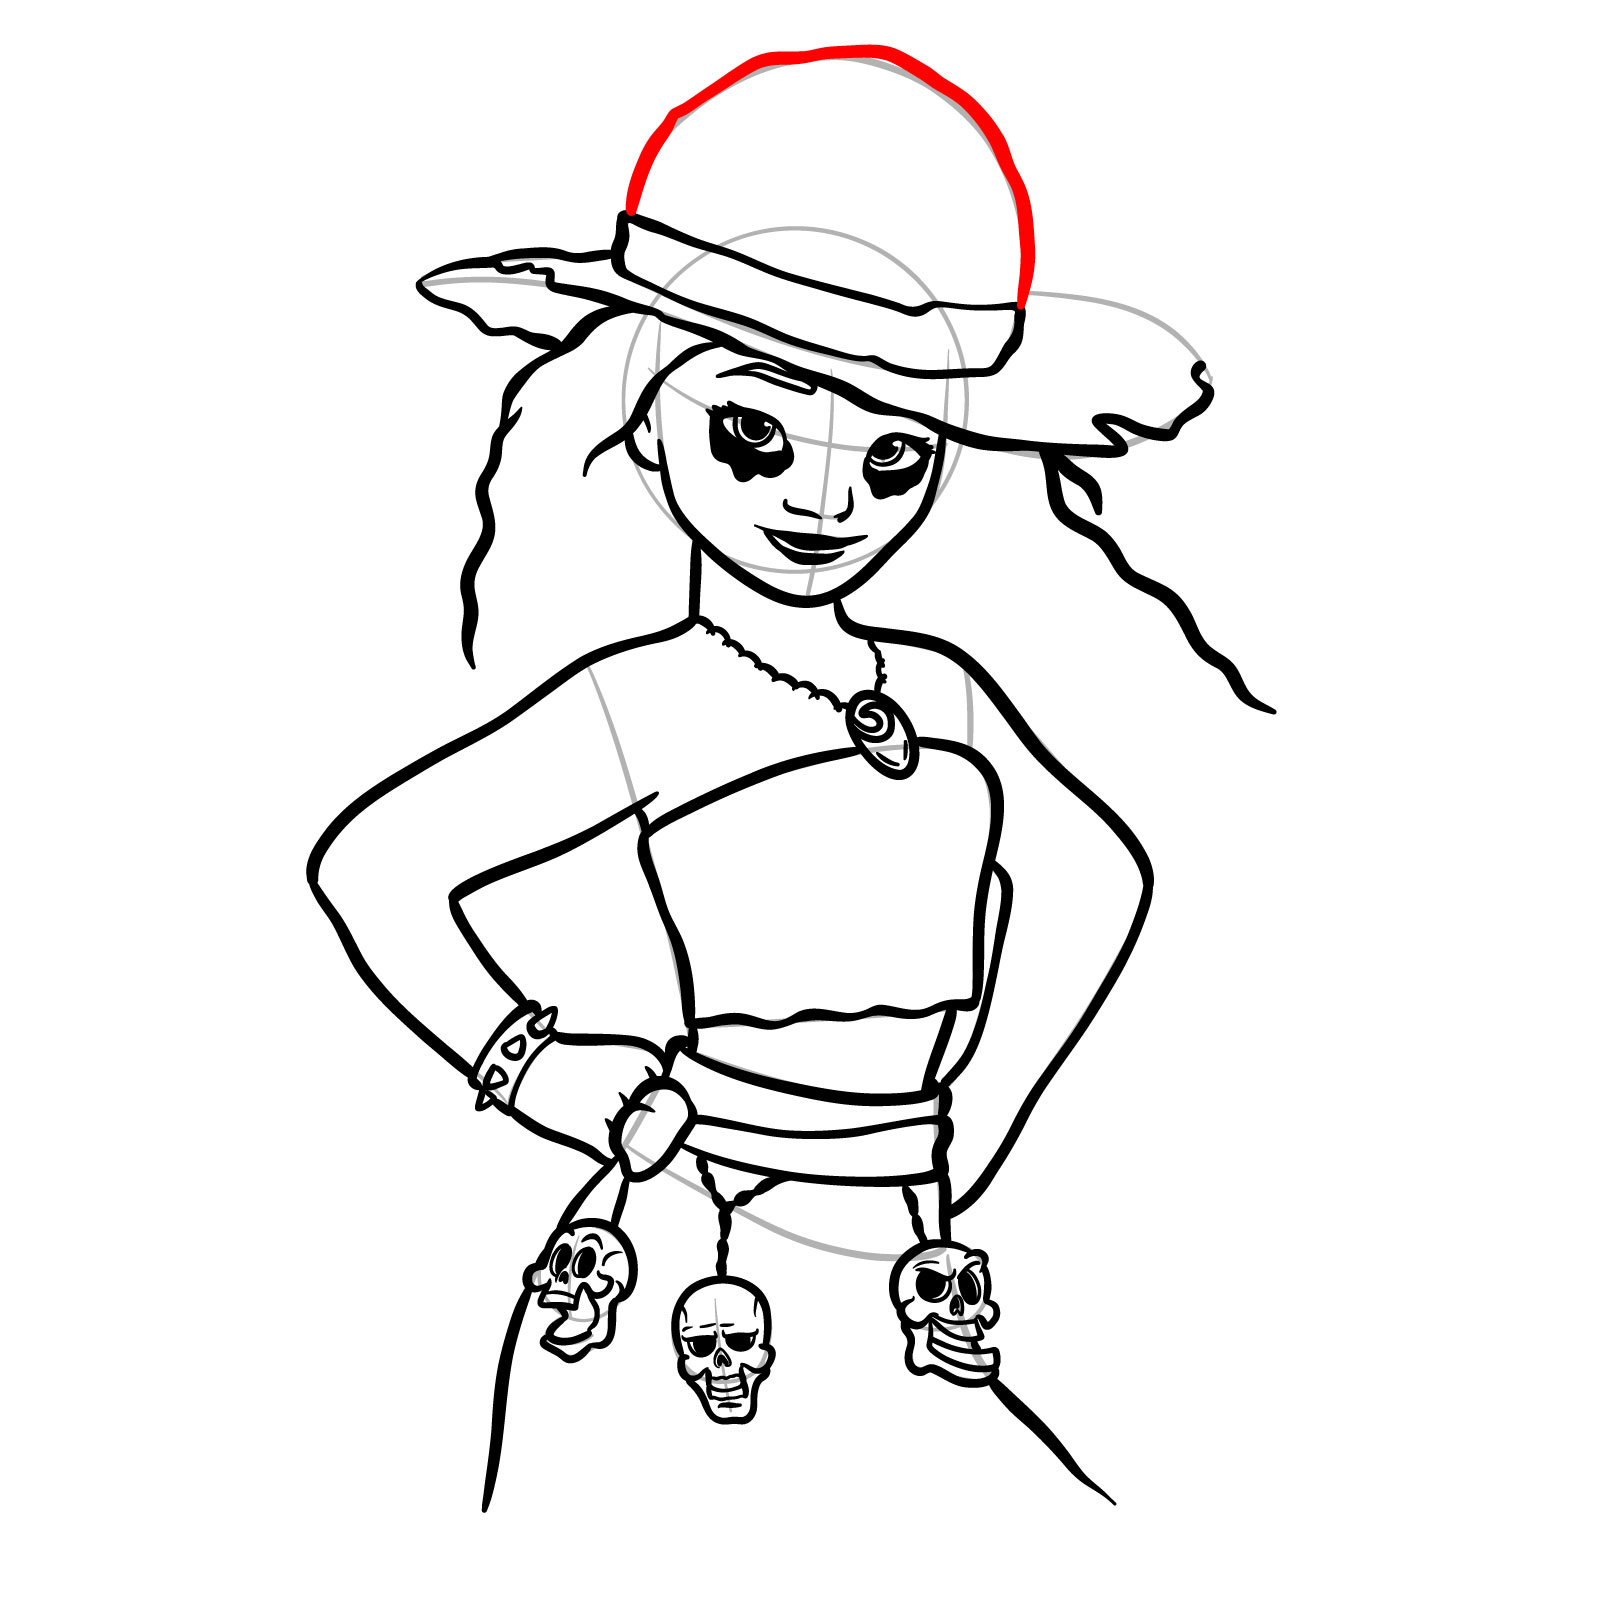 How to Draw Halloween Moana as a Staw Hat Pirate - step 33